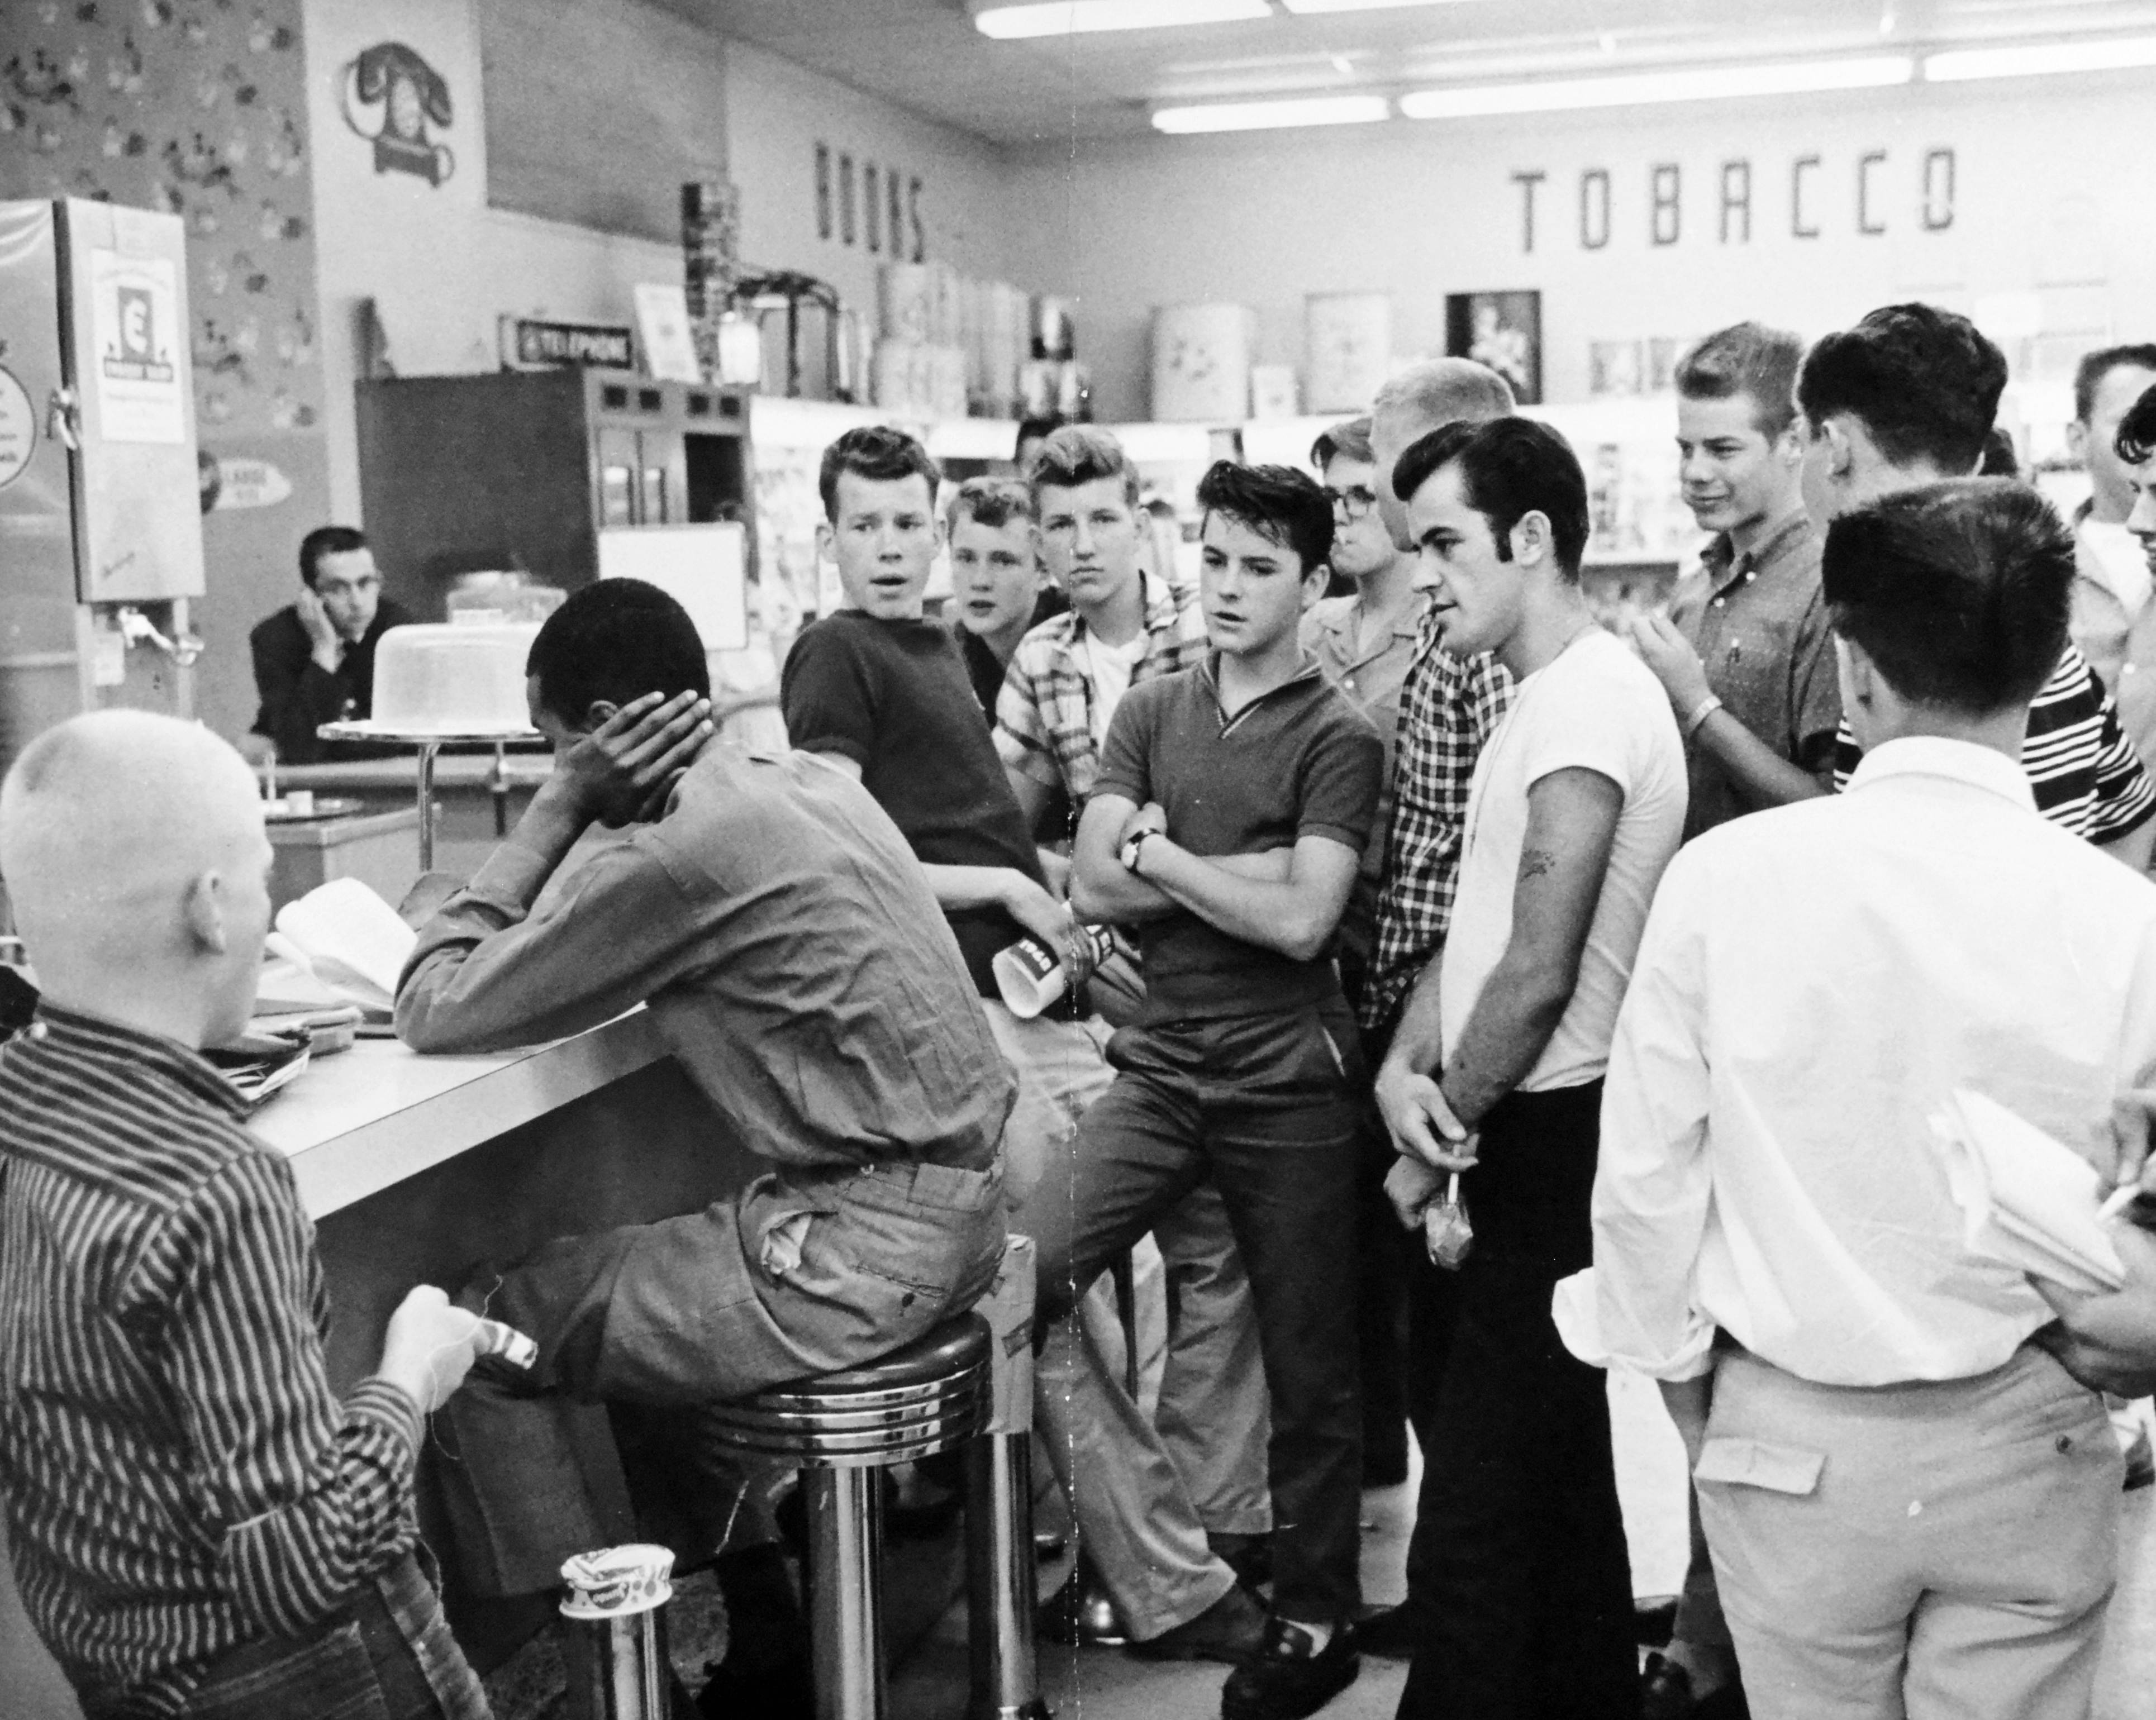 Harassment during a civil rights sit-in at the Cherrydale Drug Fair in Arlington, VA June 10, 1960.